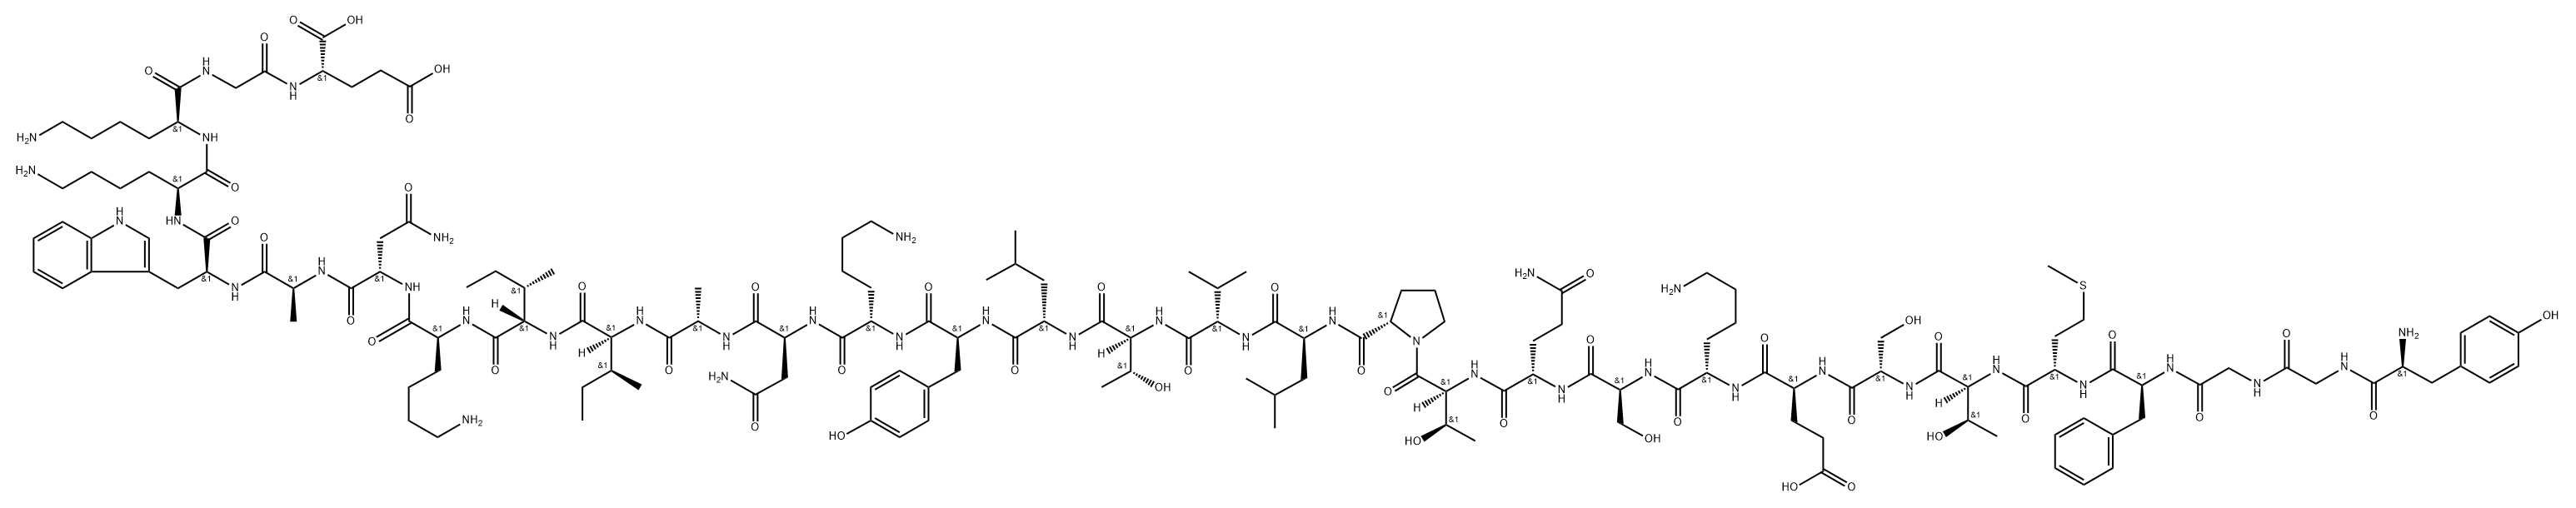 beta-endorphin, Tyr(18), Trp(27)- Structure